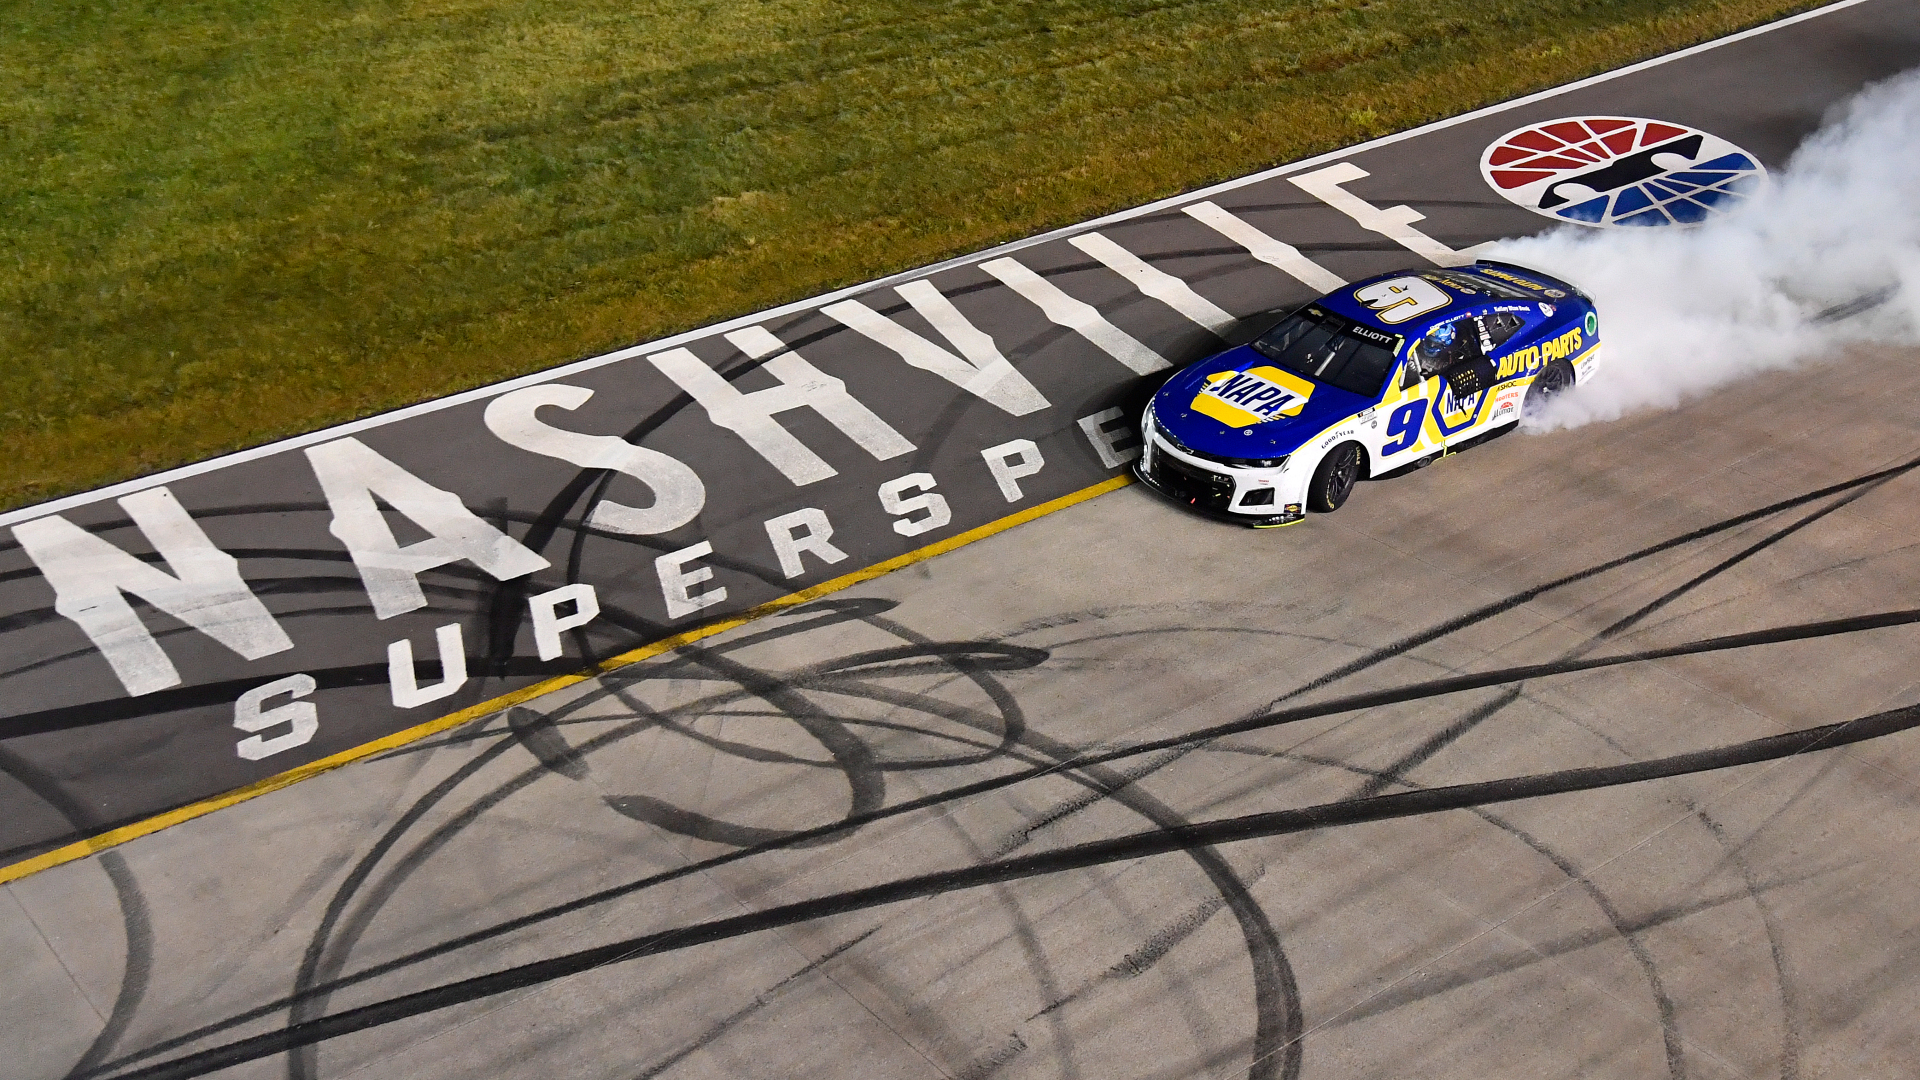 NASCAR at Nashville race results, highlights: Chase Elliott takes Ally 400 for second win of season